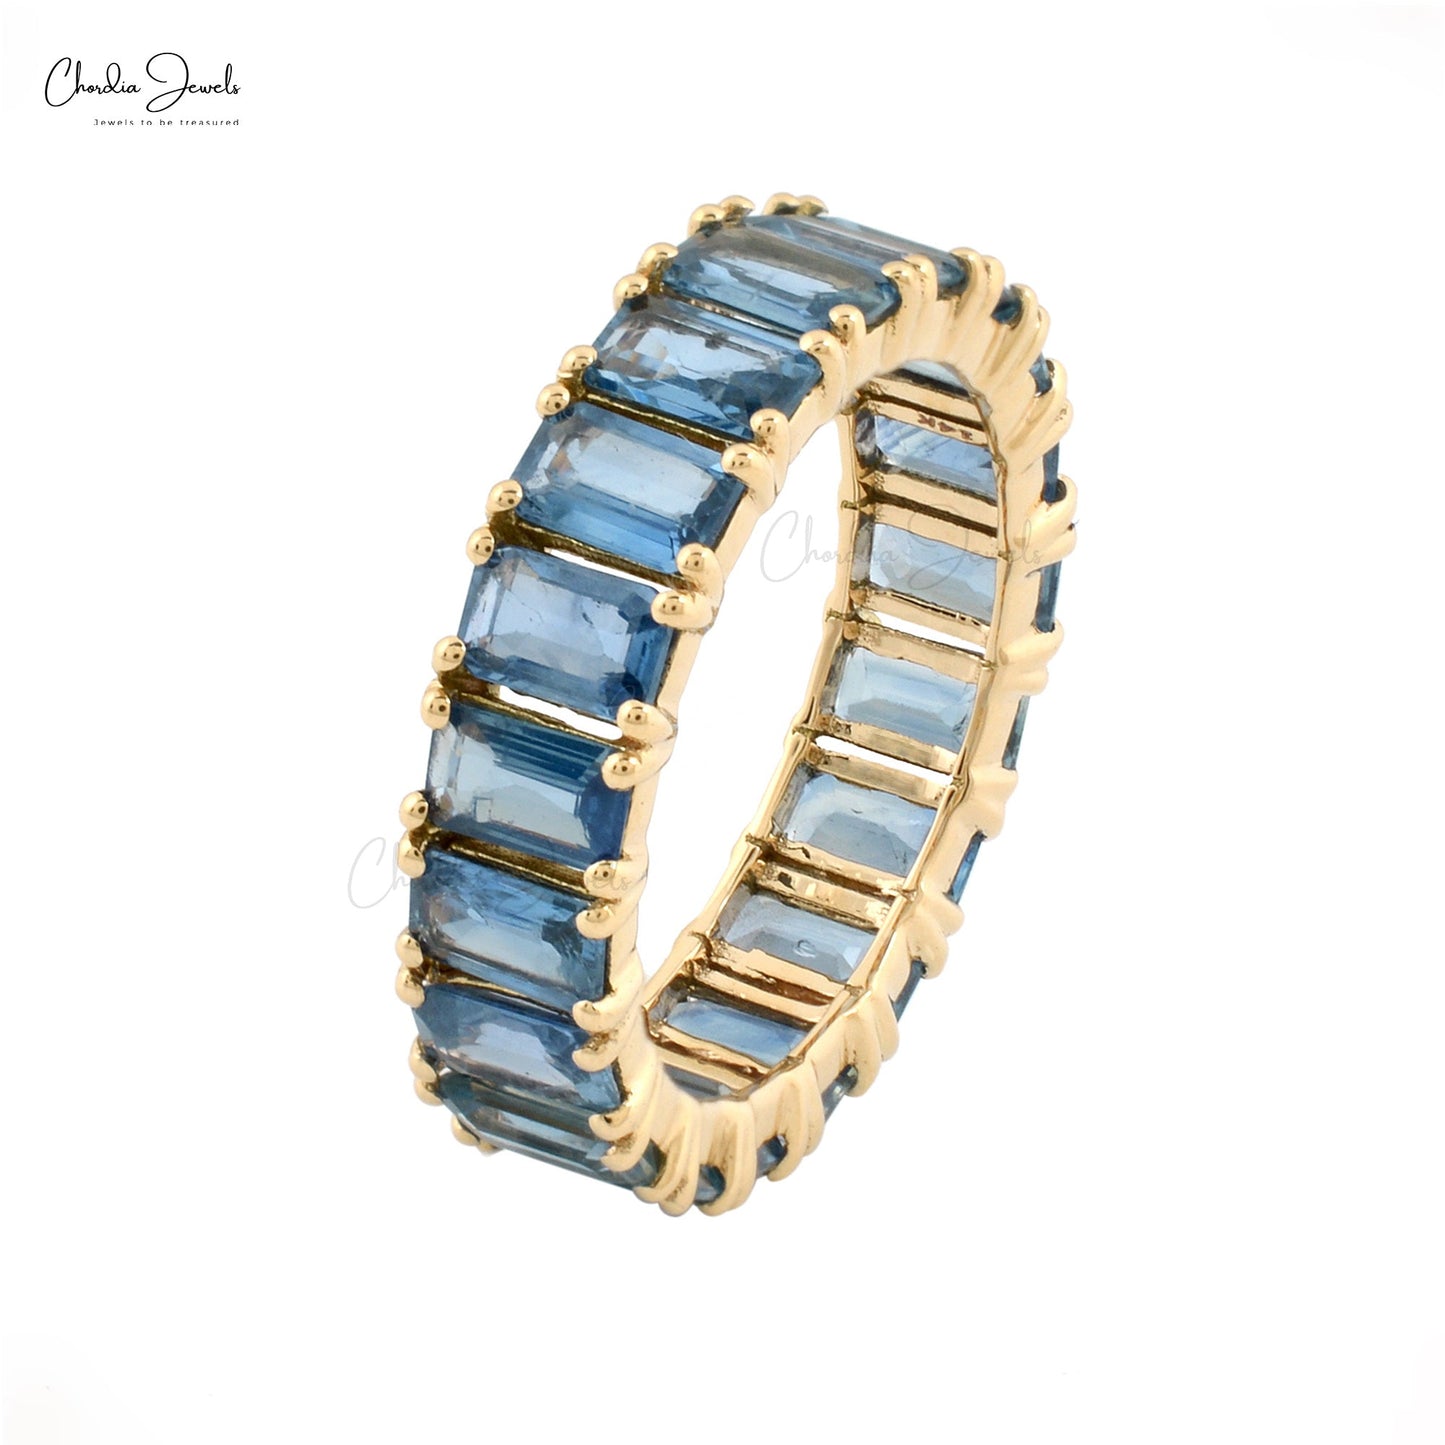 Load image into Gallery viewer, Emerald Cut 5x3mm Blue Sapphire Eternity Band 14k Solid Yellow Gold Ring Size US-6.75 Prong Set Ring For Her
